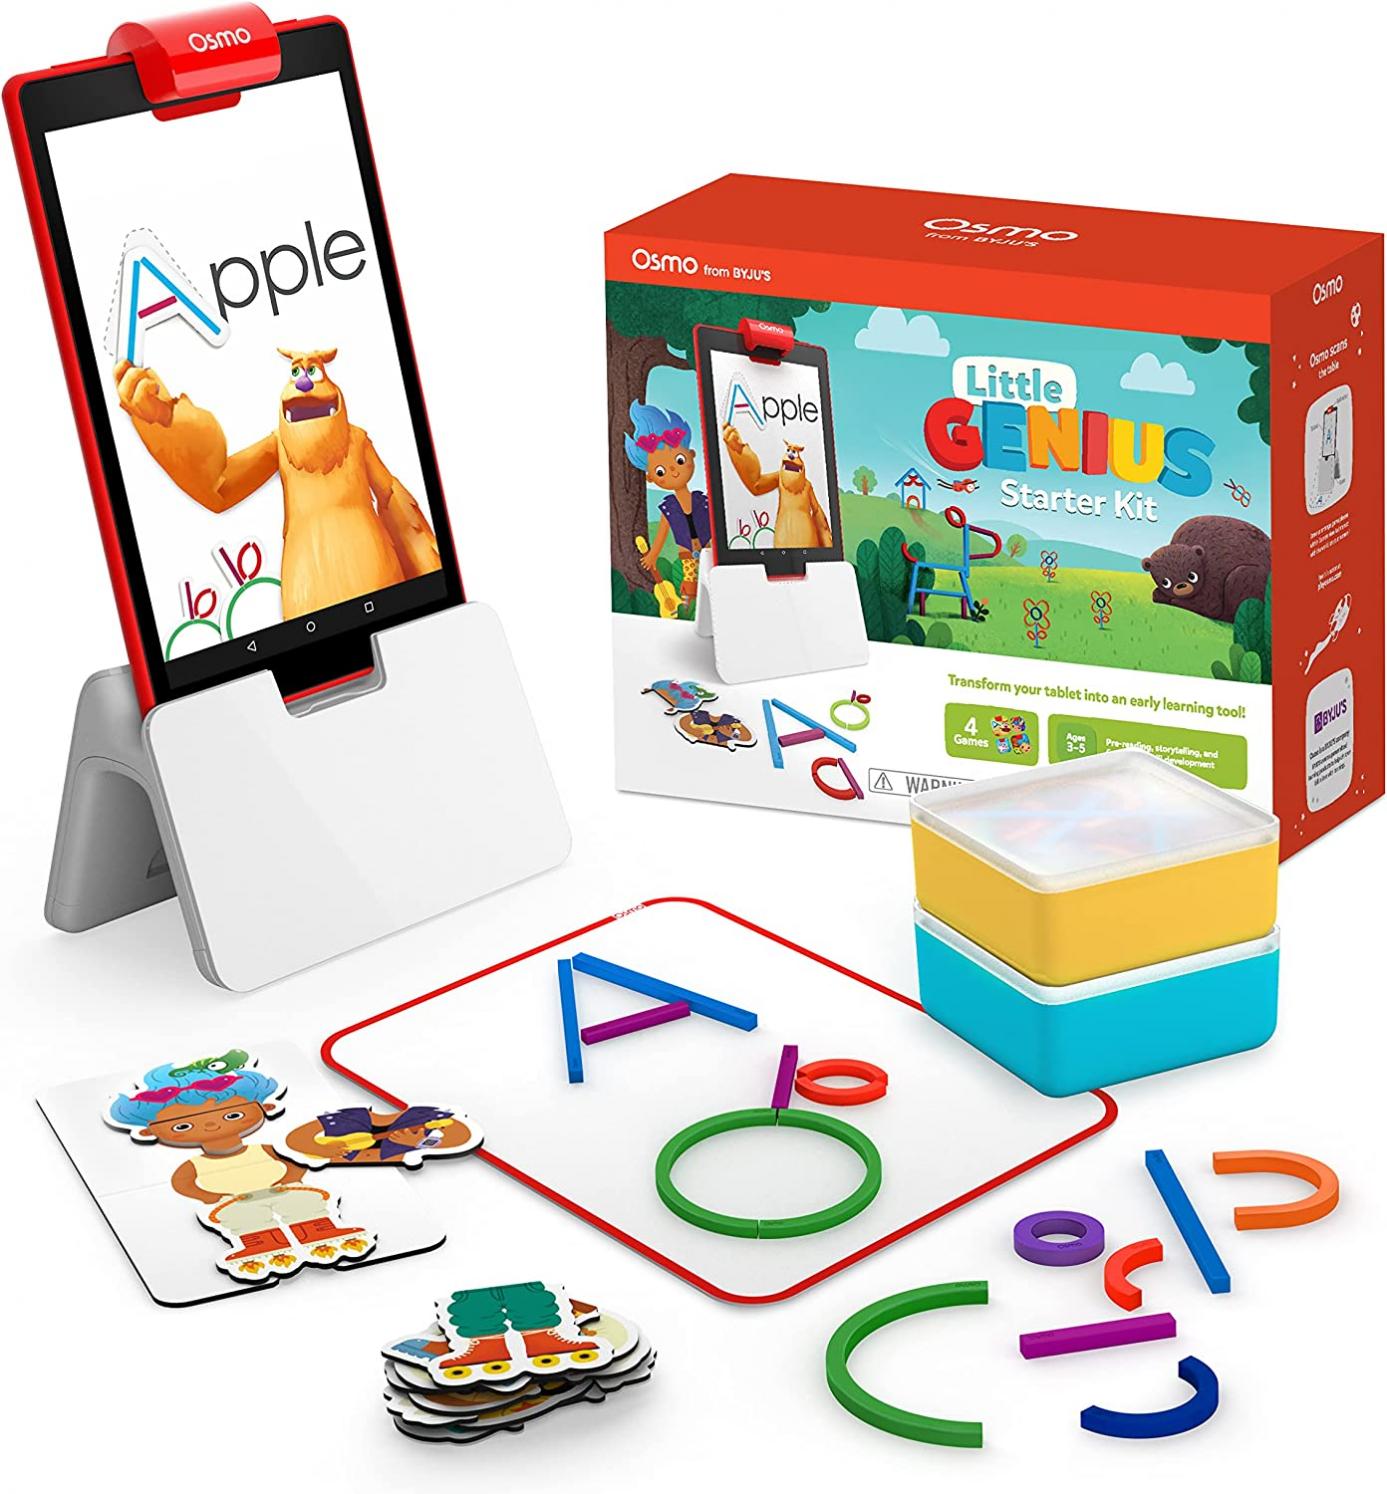 Osmo-Little Genius Starter Kit for Fire Tablet-4 Educational Learning Games-Preschool Ages 3-5-Phonics,Problem Solving & Creativity-STEM Toy Gifts,Kids(Osmo Fire Tablet Base Included-Amazon Exclusive)